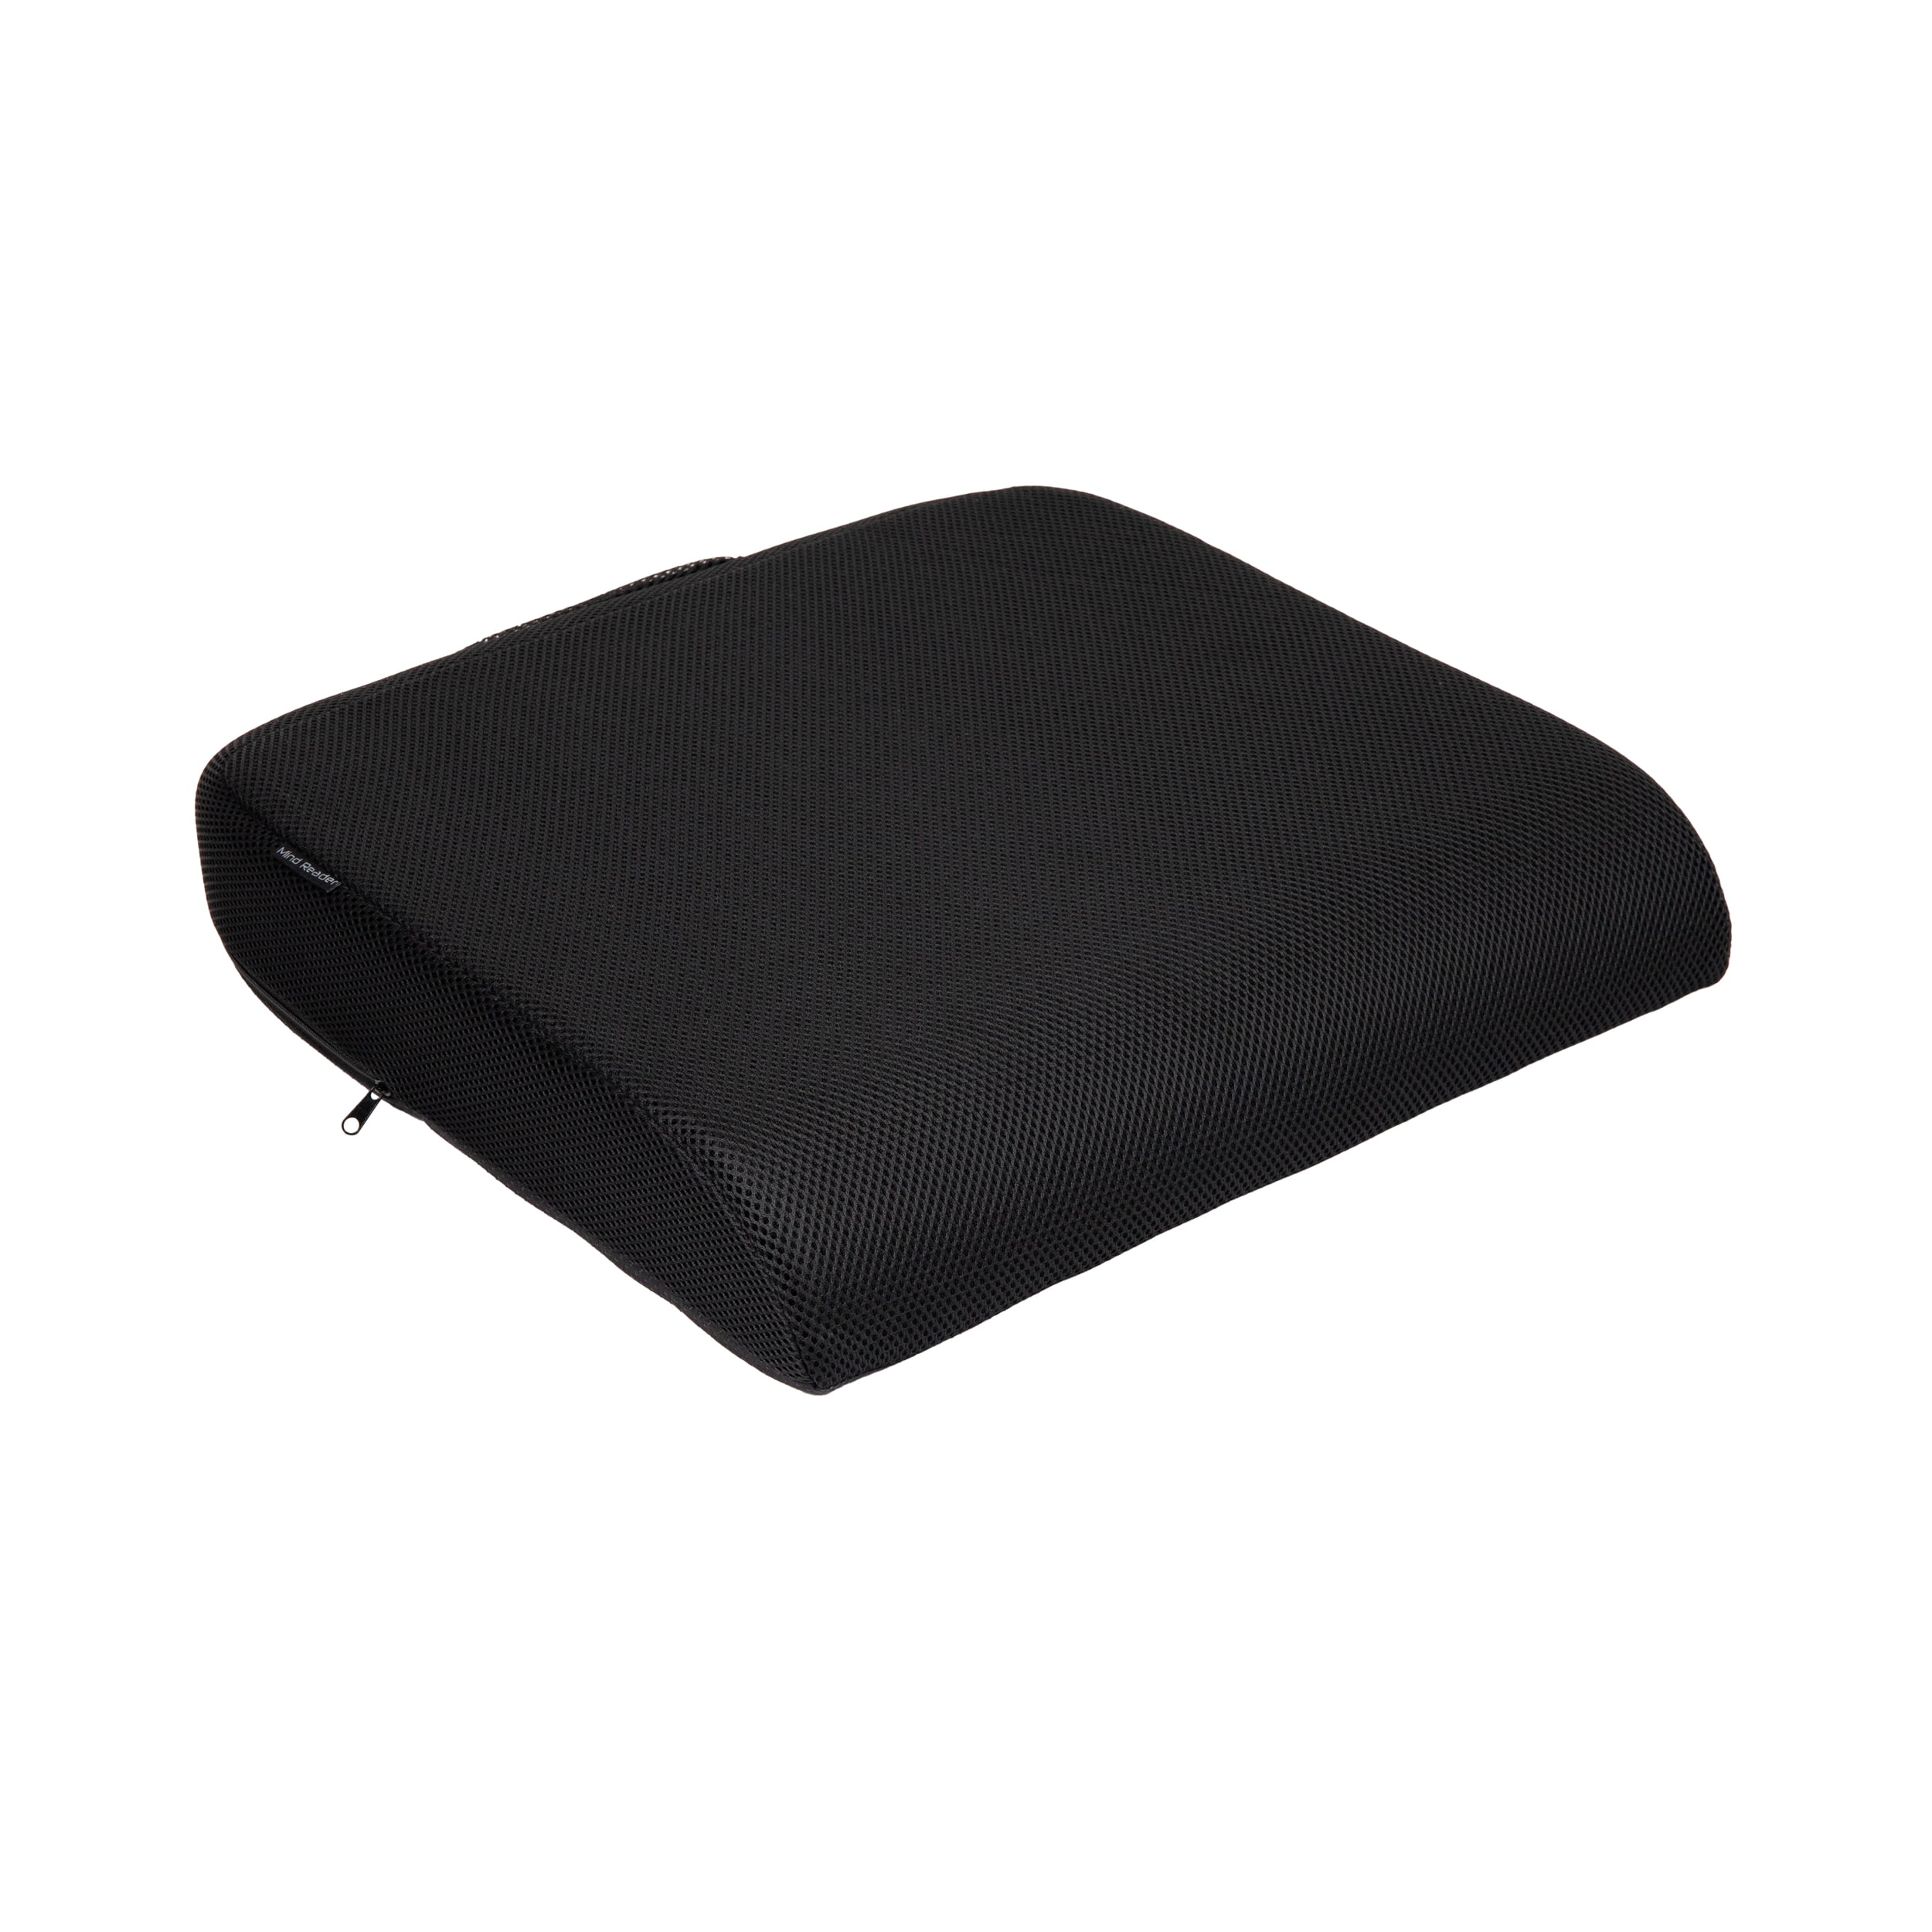 Score a Seat of Comfort: 44% Off on Desk Chair Seat Cushion for